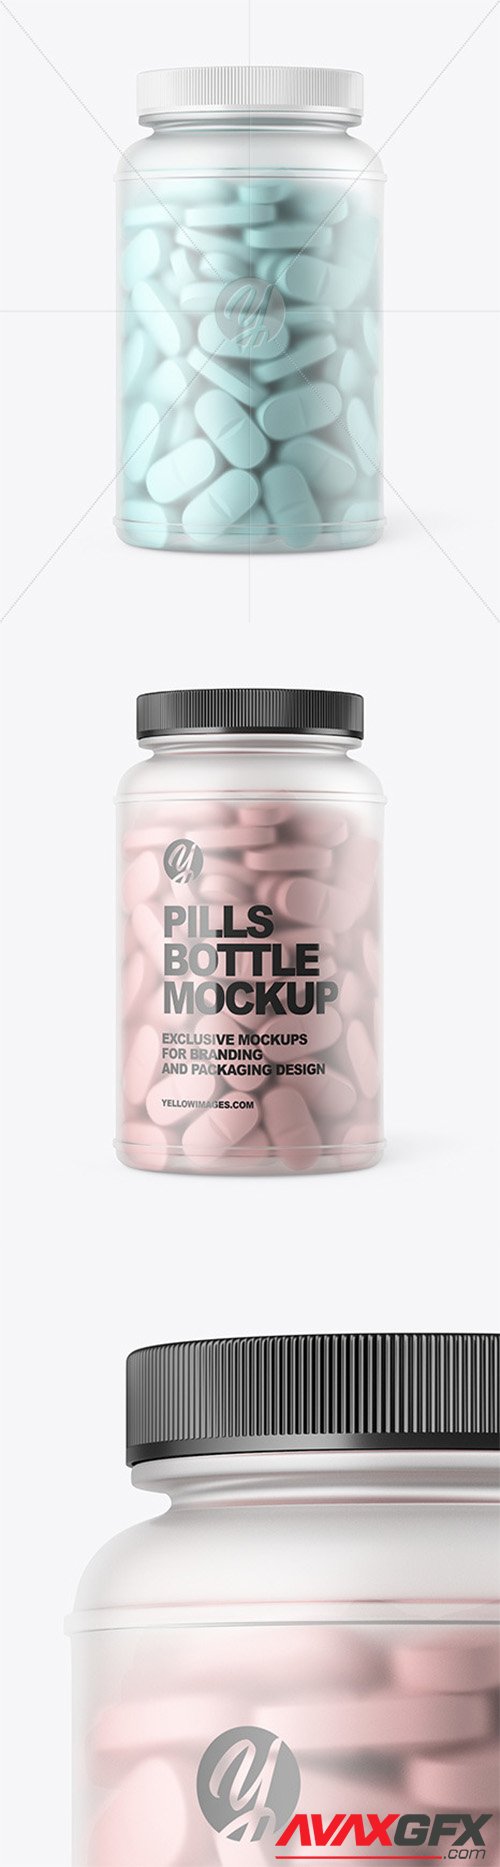 Frosted Pills Bottle Mockup 60524 Avaxgfx All Downloads That You Need In One Place Graphic From Nitroflare Rapidgator